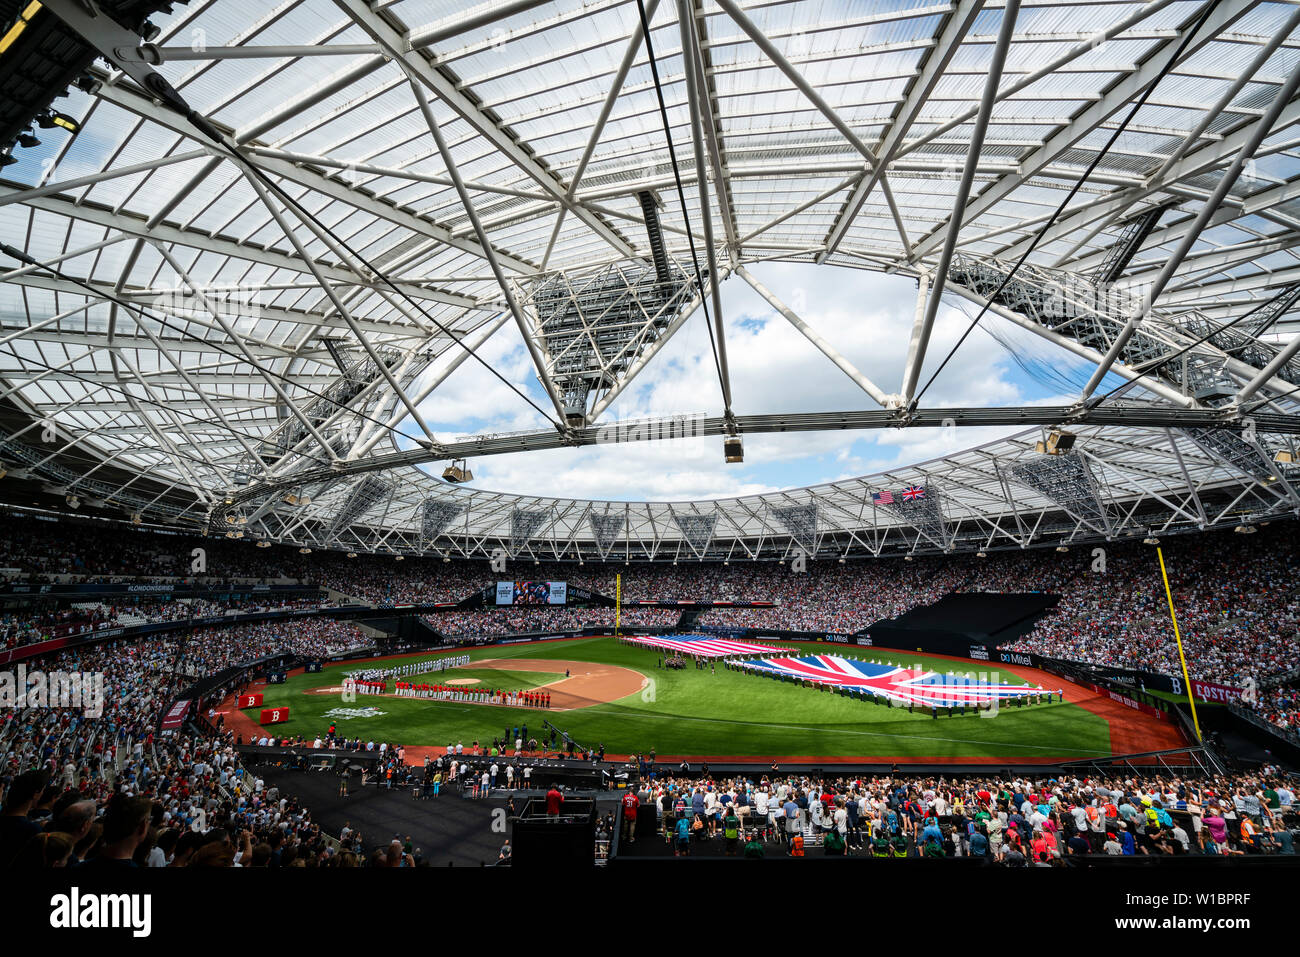 U.S. Airmen present the colors of the American flag next to their Royal military partners during game two of the Major League Baseball London Series at London Stadium June 30, 2019. The game featured two of MLB's oldest teams, the New York Yankees and the Boston Red Sox in front of a sold-out venue of 60,000 fans. (U.S. Air Force photo by SSgt Rachel Maxwell) Stock Photo